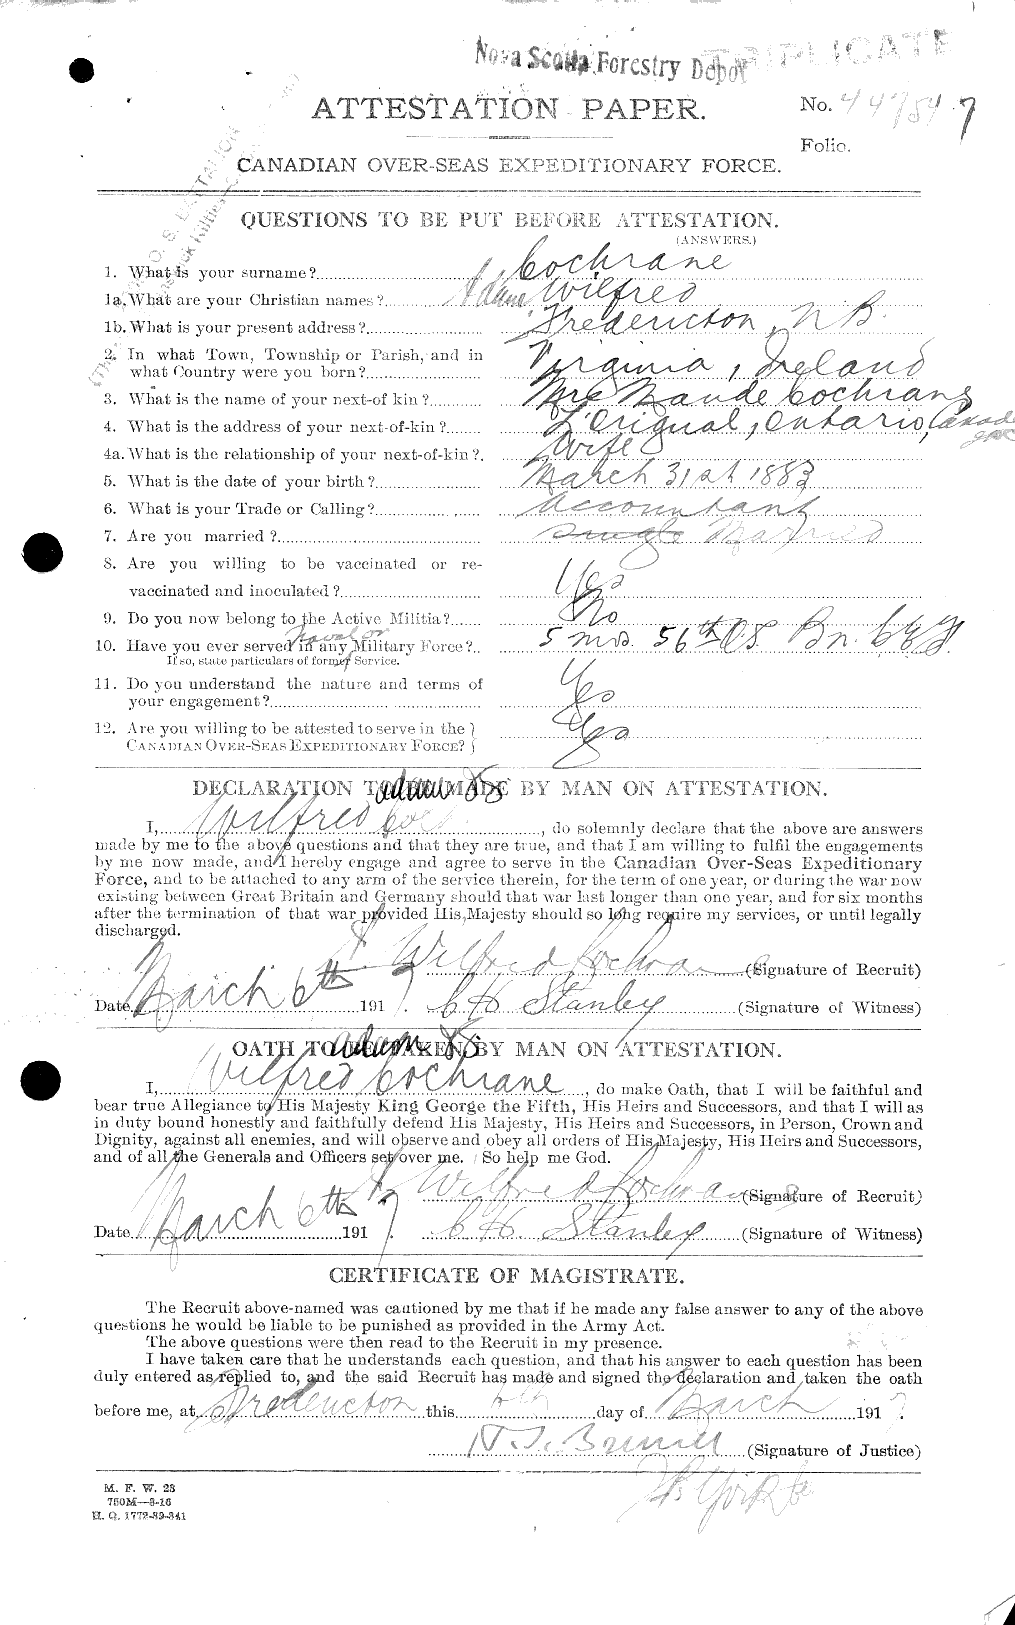 Personnel Records of the First World War - CEF 025812a